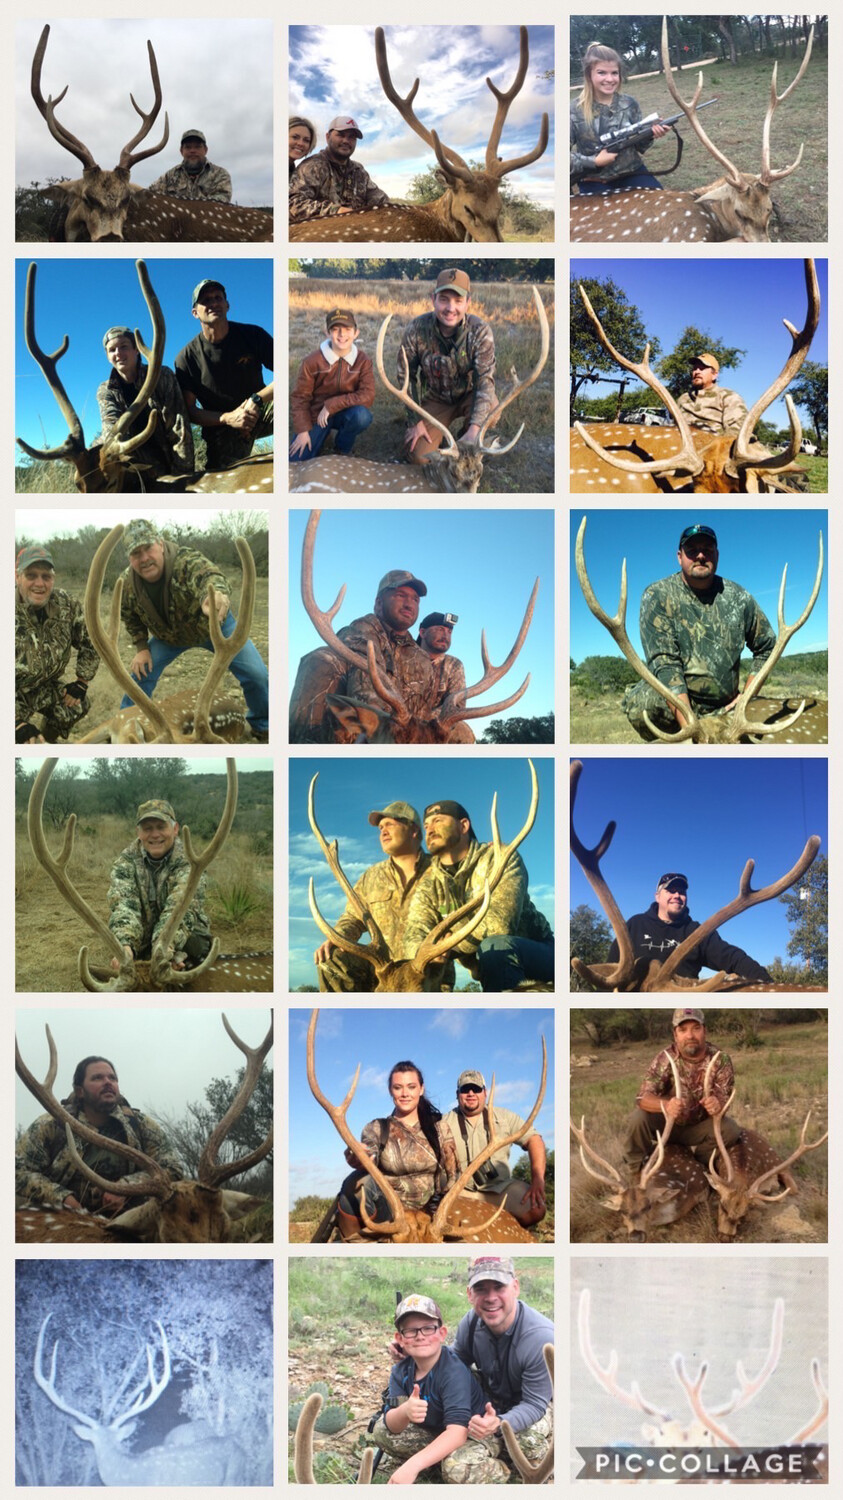 Now Booking : Affordable Family Friendly- 3 Day 2 Night All Inclusive Hunt Near Junction, Texas. Your Choice: Whitetail Or Exotics Plus Pigs, Predators And Fishing!